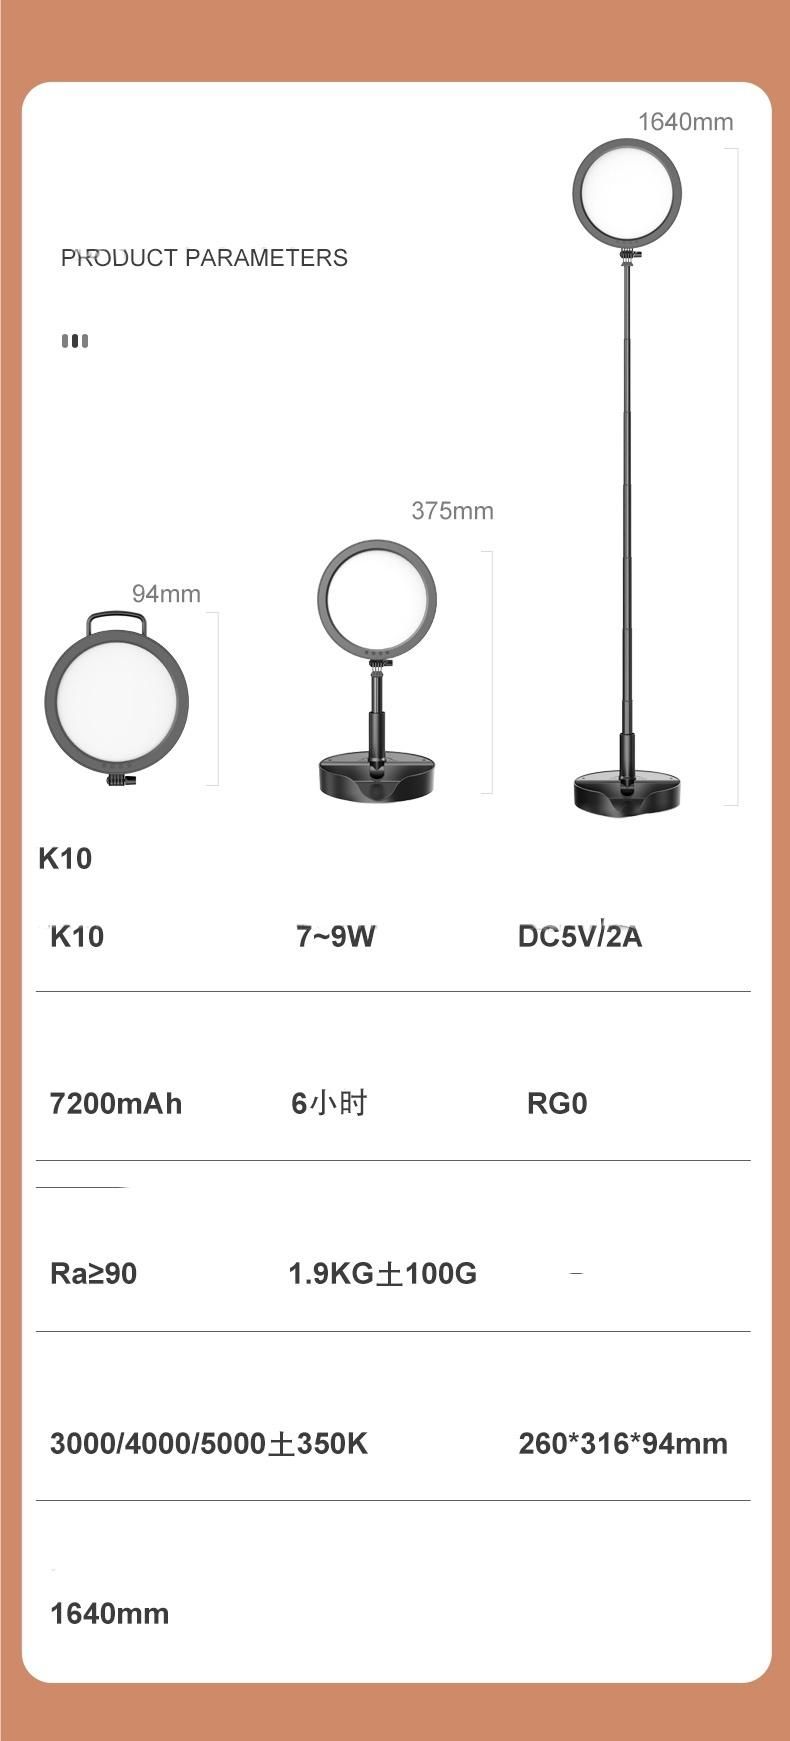 2021 Battery Powered LED Desk Lamp, Foldable and Height Adjustable Table Lamps, Dimmable Office Lamp, Adjustable Color Modes Brightness, Eye Protection Light